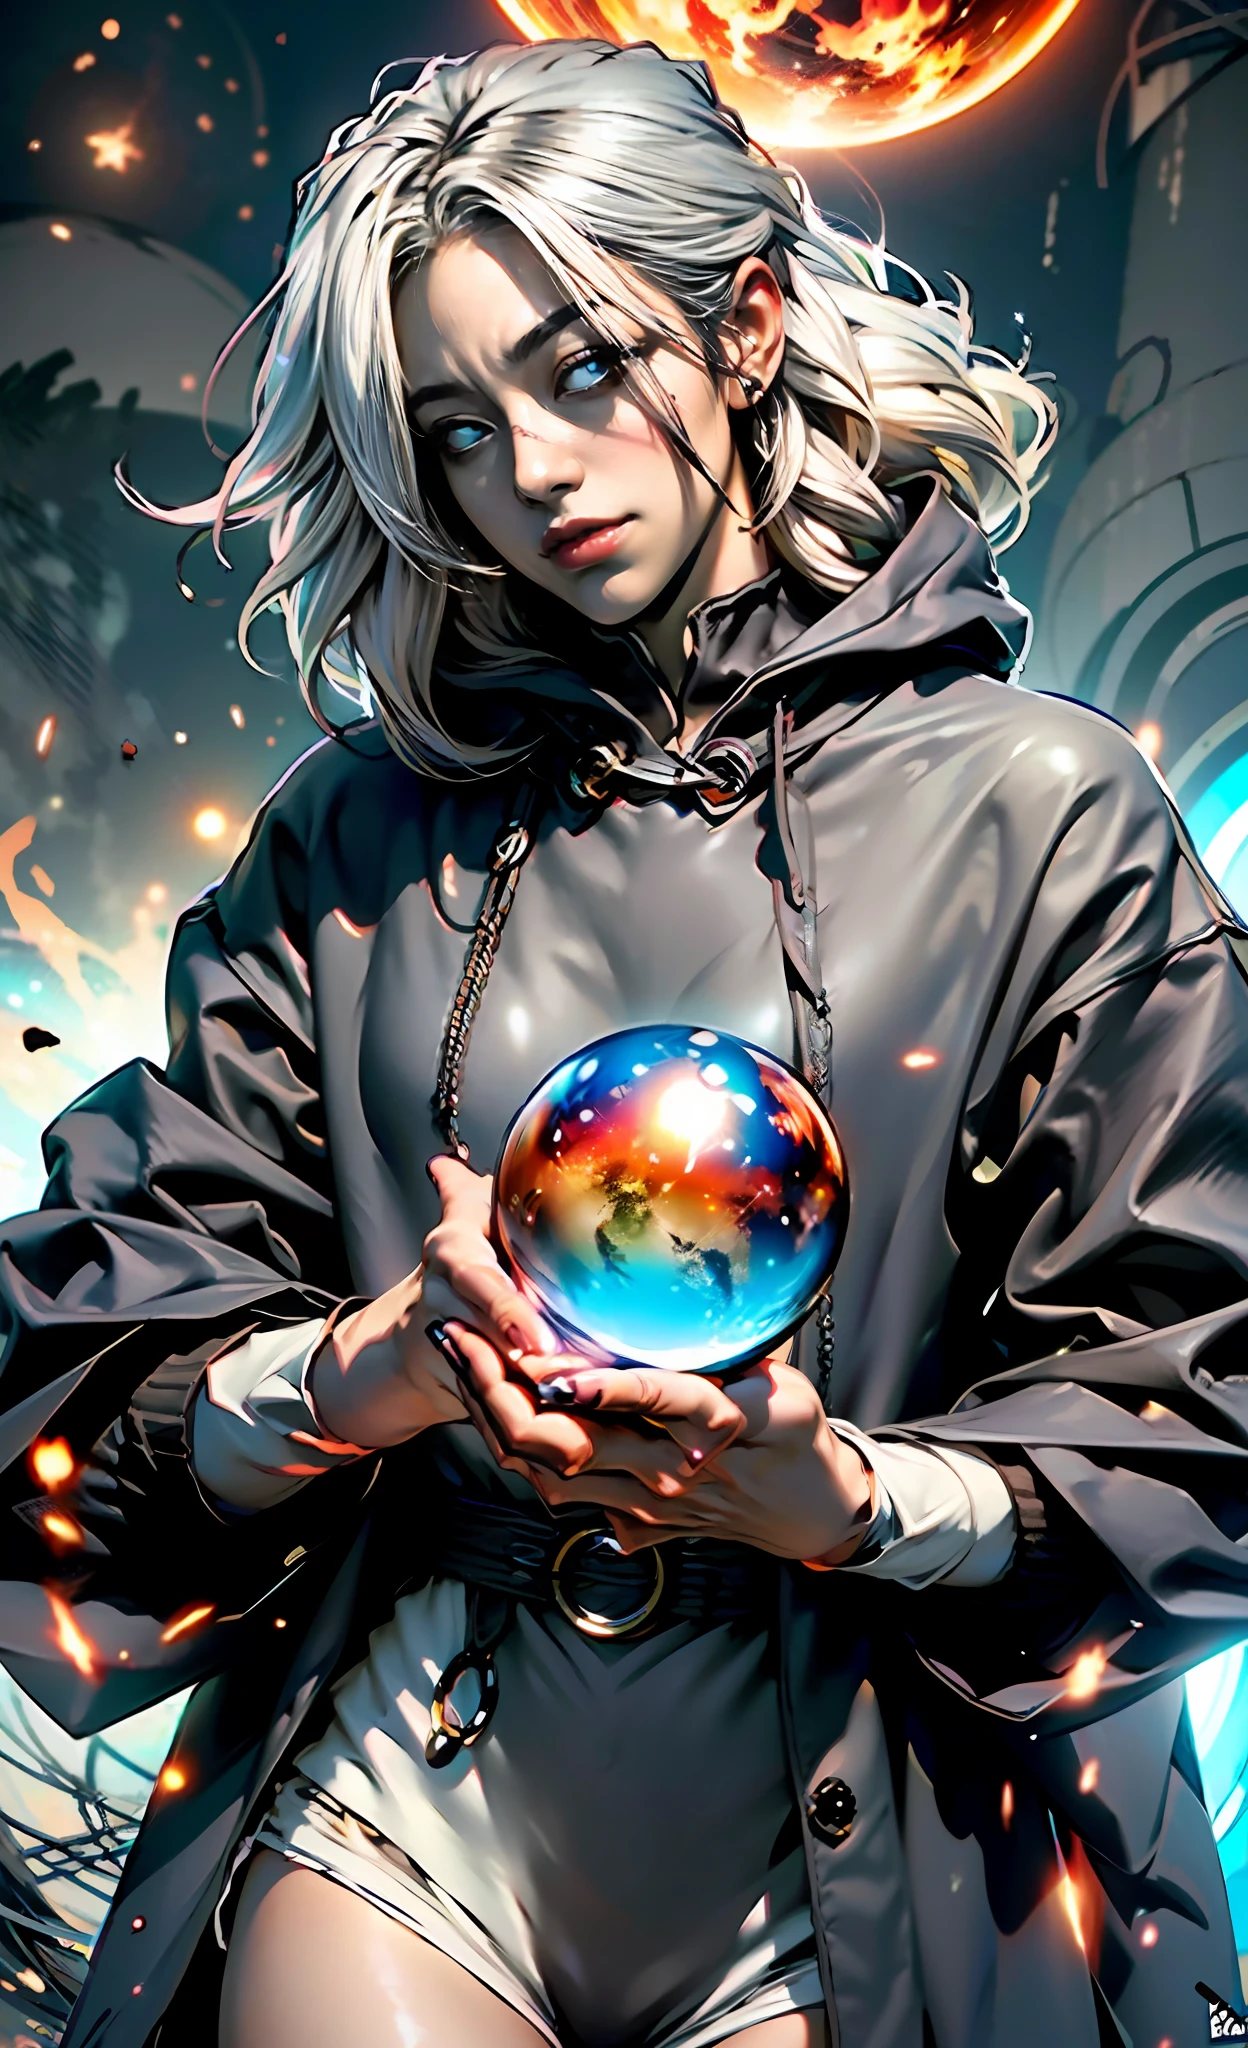 (absurdists, ah high, ultradetailed), ((A  girl)), a 1girl, androgynous vampire, High Stability, ((white colored hair)), pubic tattoo, ((Holds a magical sphere in his hands:1.6)). ((чрезвычайно детализированные обои CG unity 8k, intricate detials, (style-swirlmagic: 0.8), portraite of a, looking a viewer, solo, (full length: 0.6), dynamicpose, Detailed background, Madness in the eyes, floating in the air,  A Necromancer, Evil to the bone, Red clouds, casting spell, fireball, Dark hooded mantle, The Dark Circle, Underworld, Warhammer theme, bringer of false light, dark clouds, floating chunks of dirt, decadence, Outgoing evil energy, dark aura, Broken shackles)), (cowboy  shot) junji ito 4 k, with long gray hair, this junji art, style of junji ito, portrait of sadako of the ring, Gentle androgynous princess , Beautiful androgynous princess, nice feet, detailing, Burst breasts, extra high resolution, 8k, (Lovely Medium Breasts), perfect anatomy, (shapely body), Beautiful slender legs, Extremely detailed eyes and face, beautiful detail eyes, extremely detailed body, ((Gloomy color scheme:1.6))